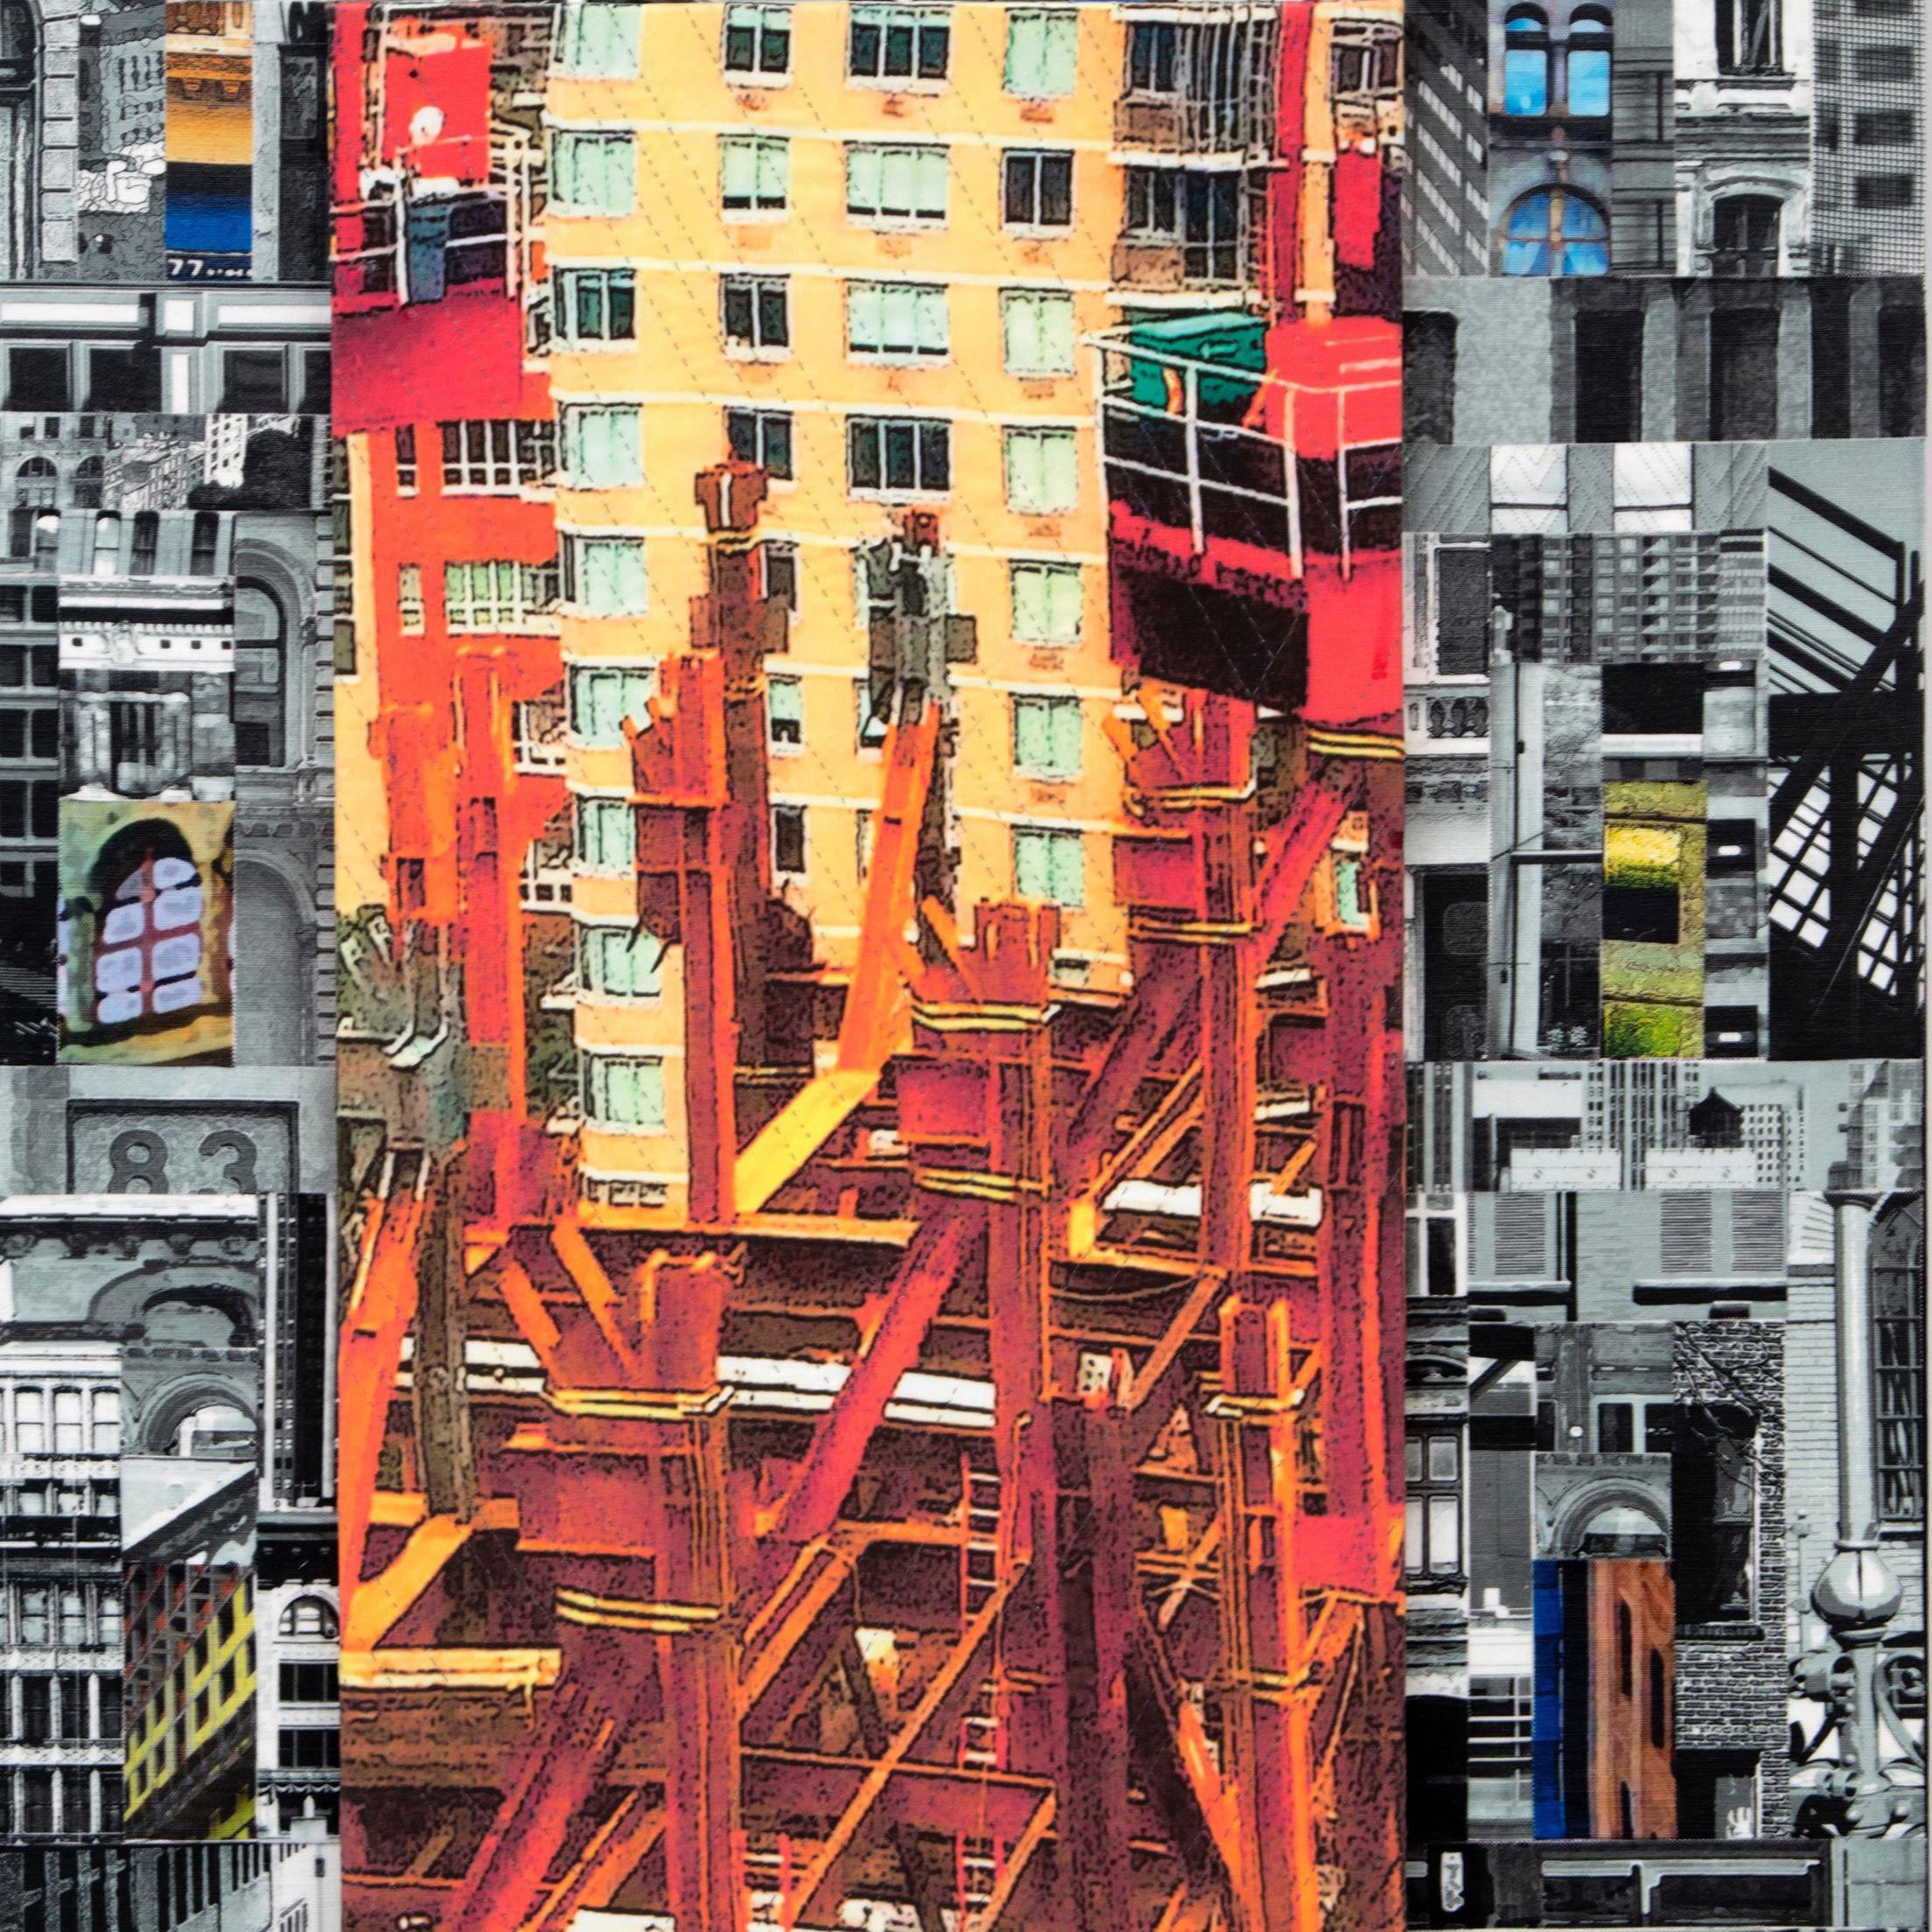 Patchwork City 27, Mixed Media on Canvas - Contemporary Mixed Media Art by Marilyn Henrion